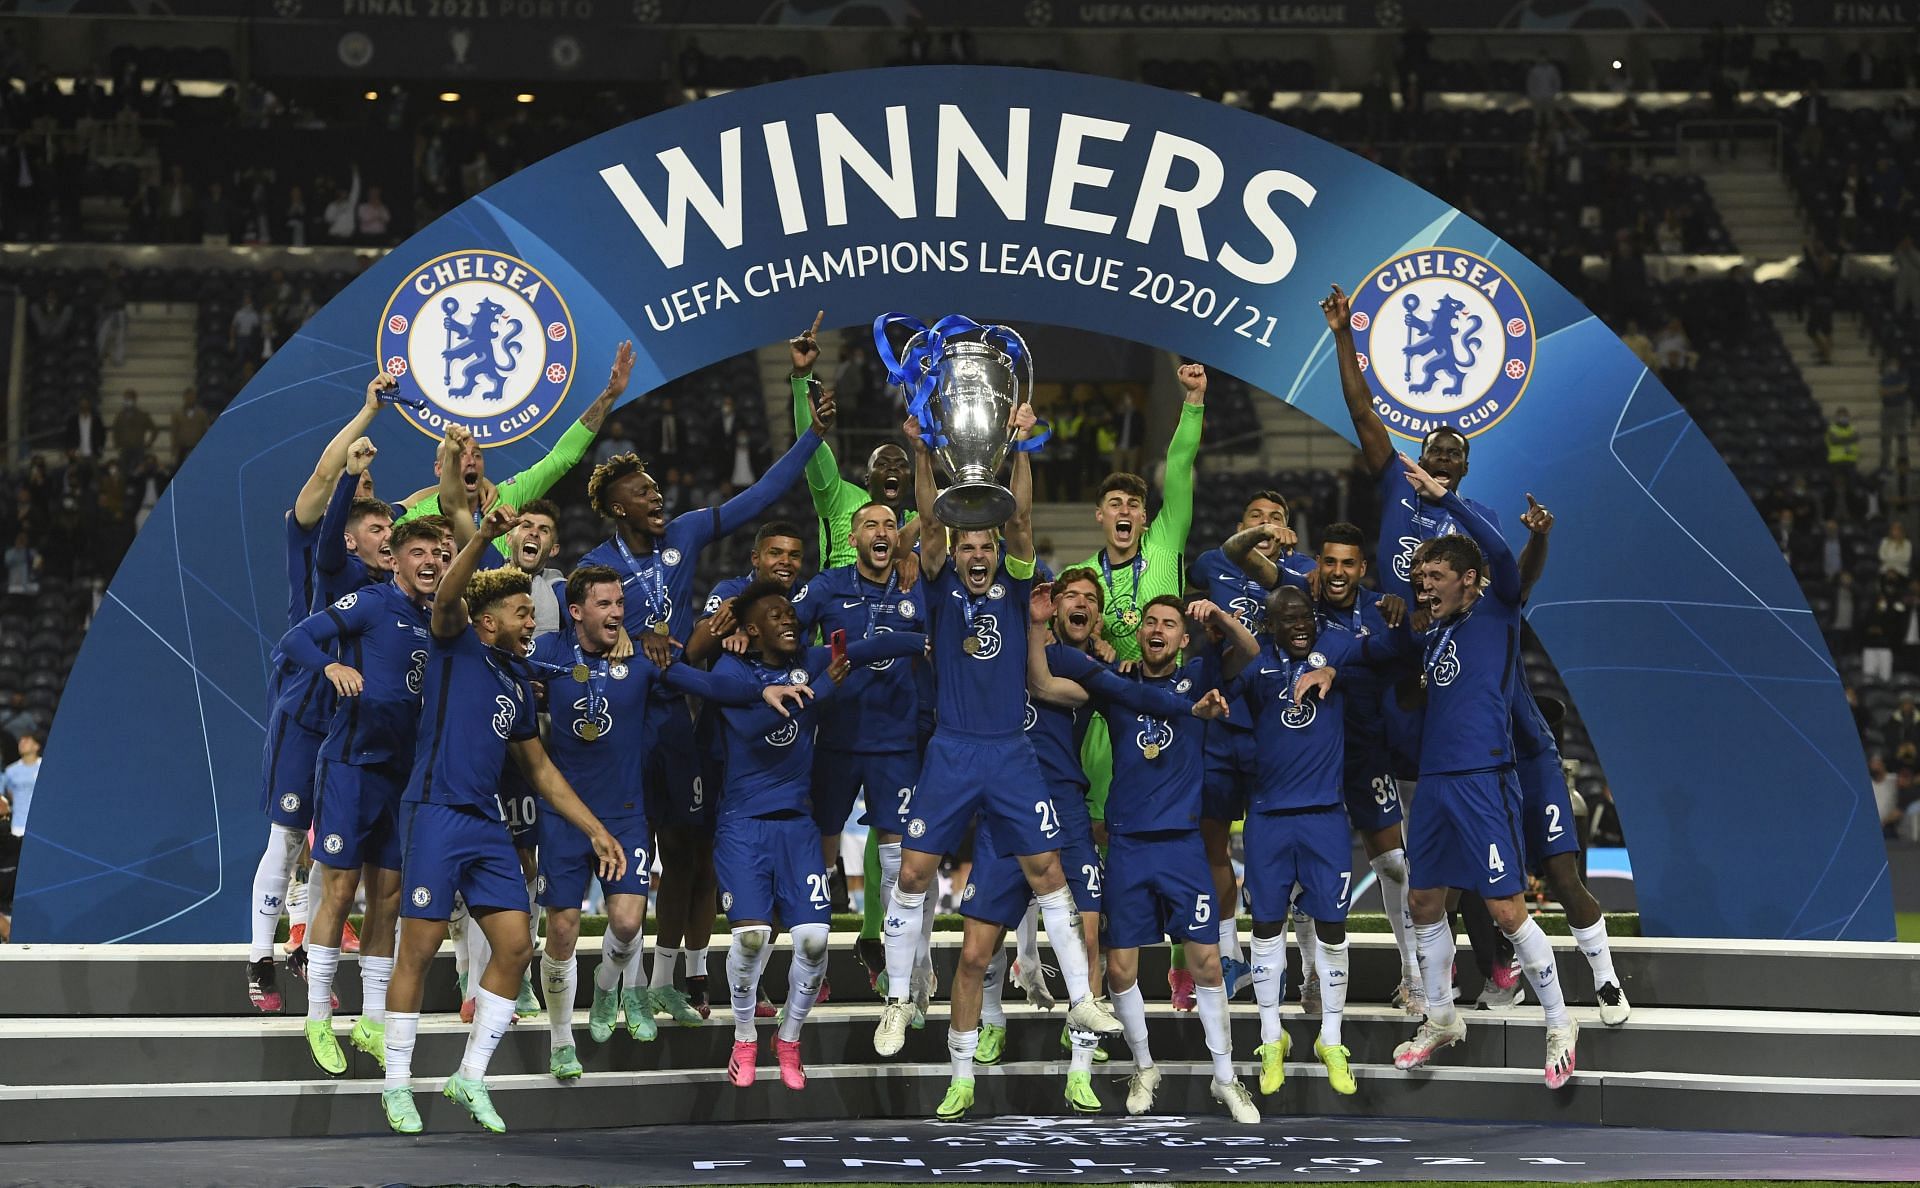 Chelsea have won four major European trophies over the last 10 years.